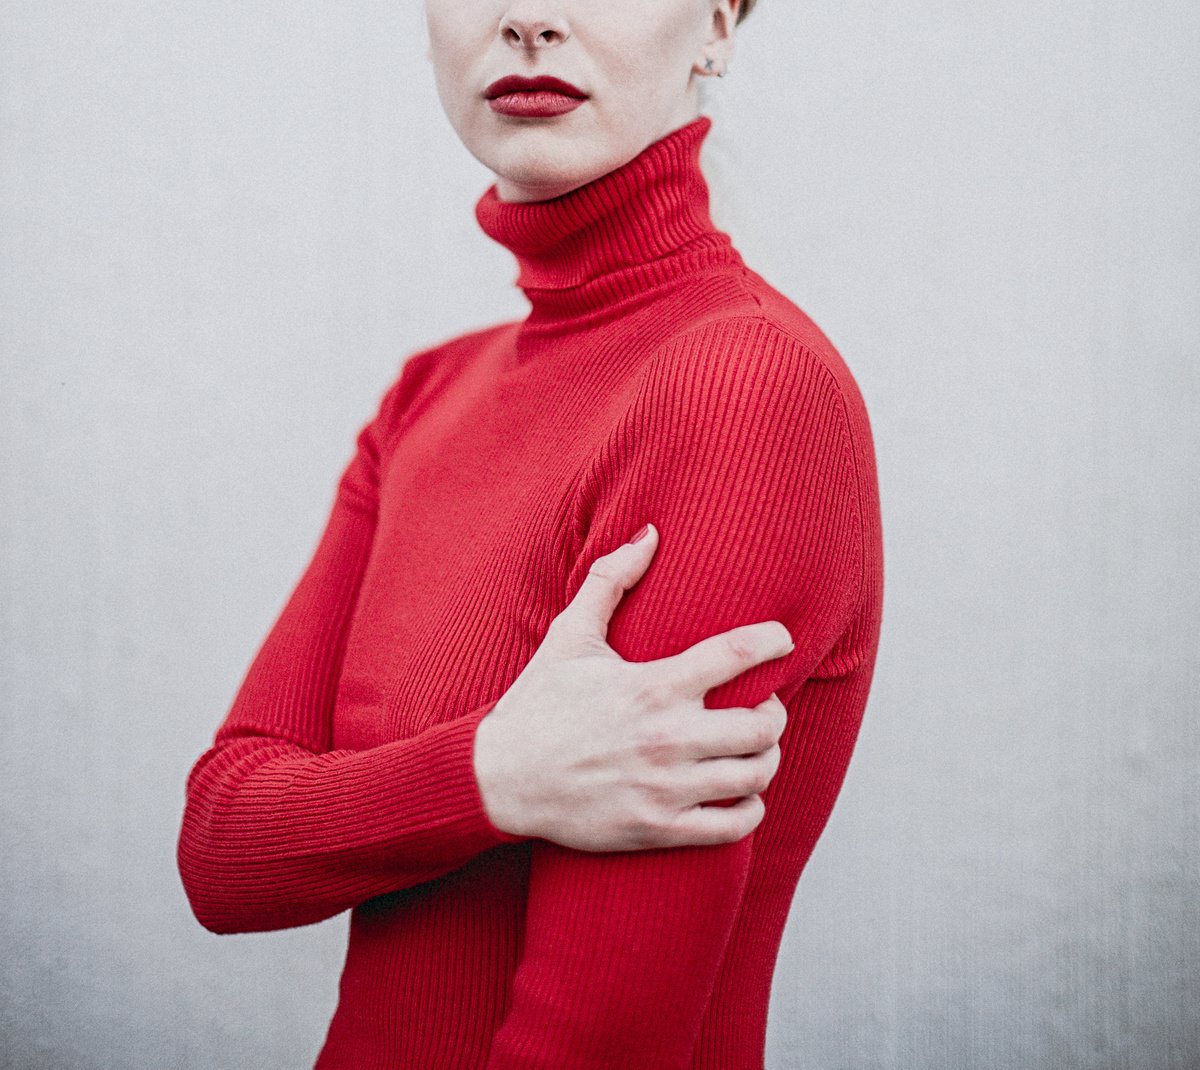 Red Lipstick Series 1 by Dasha Pears